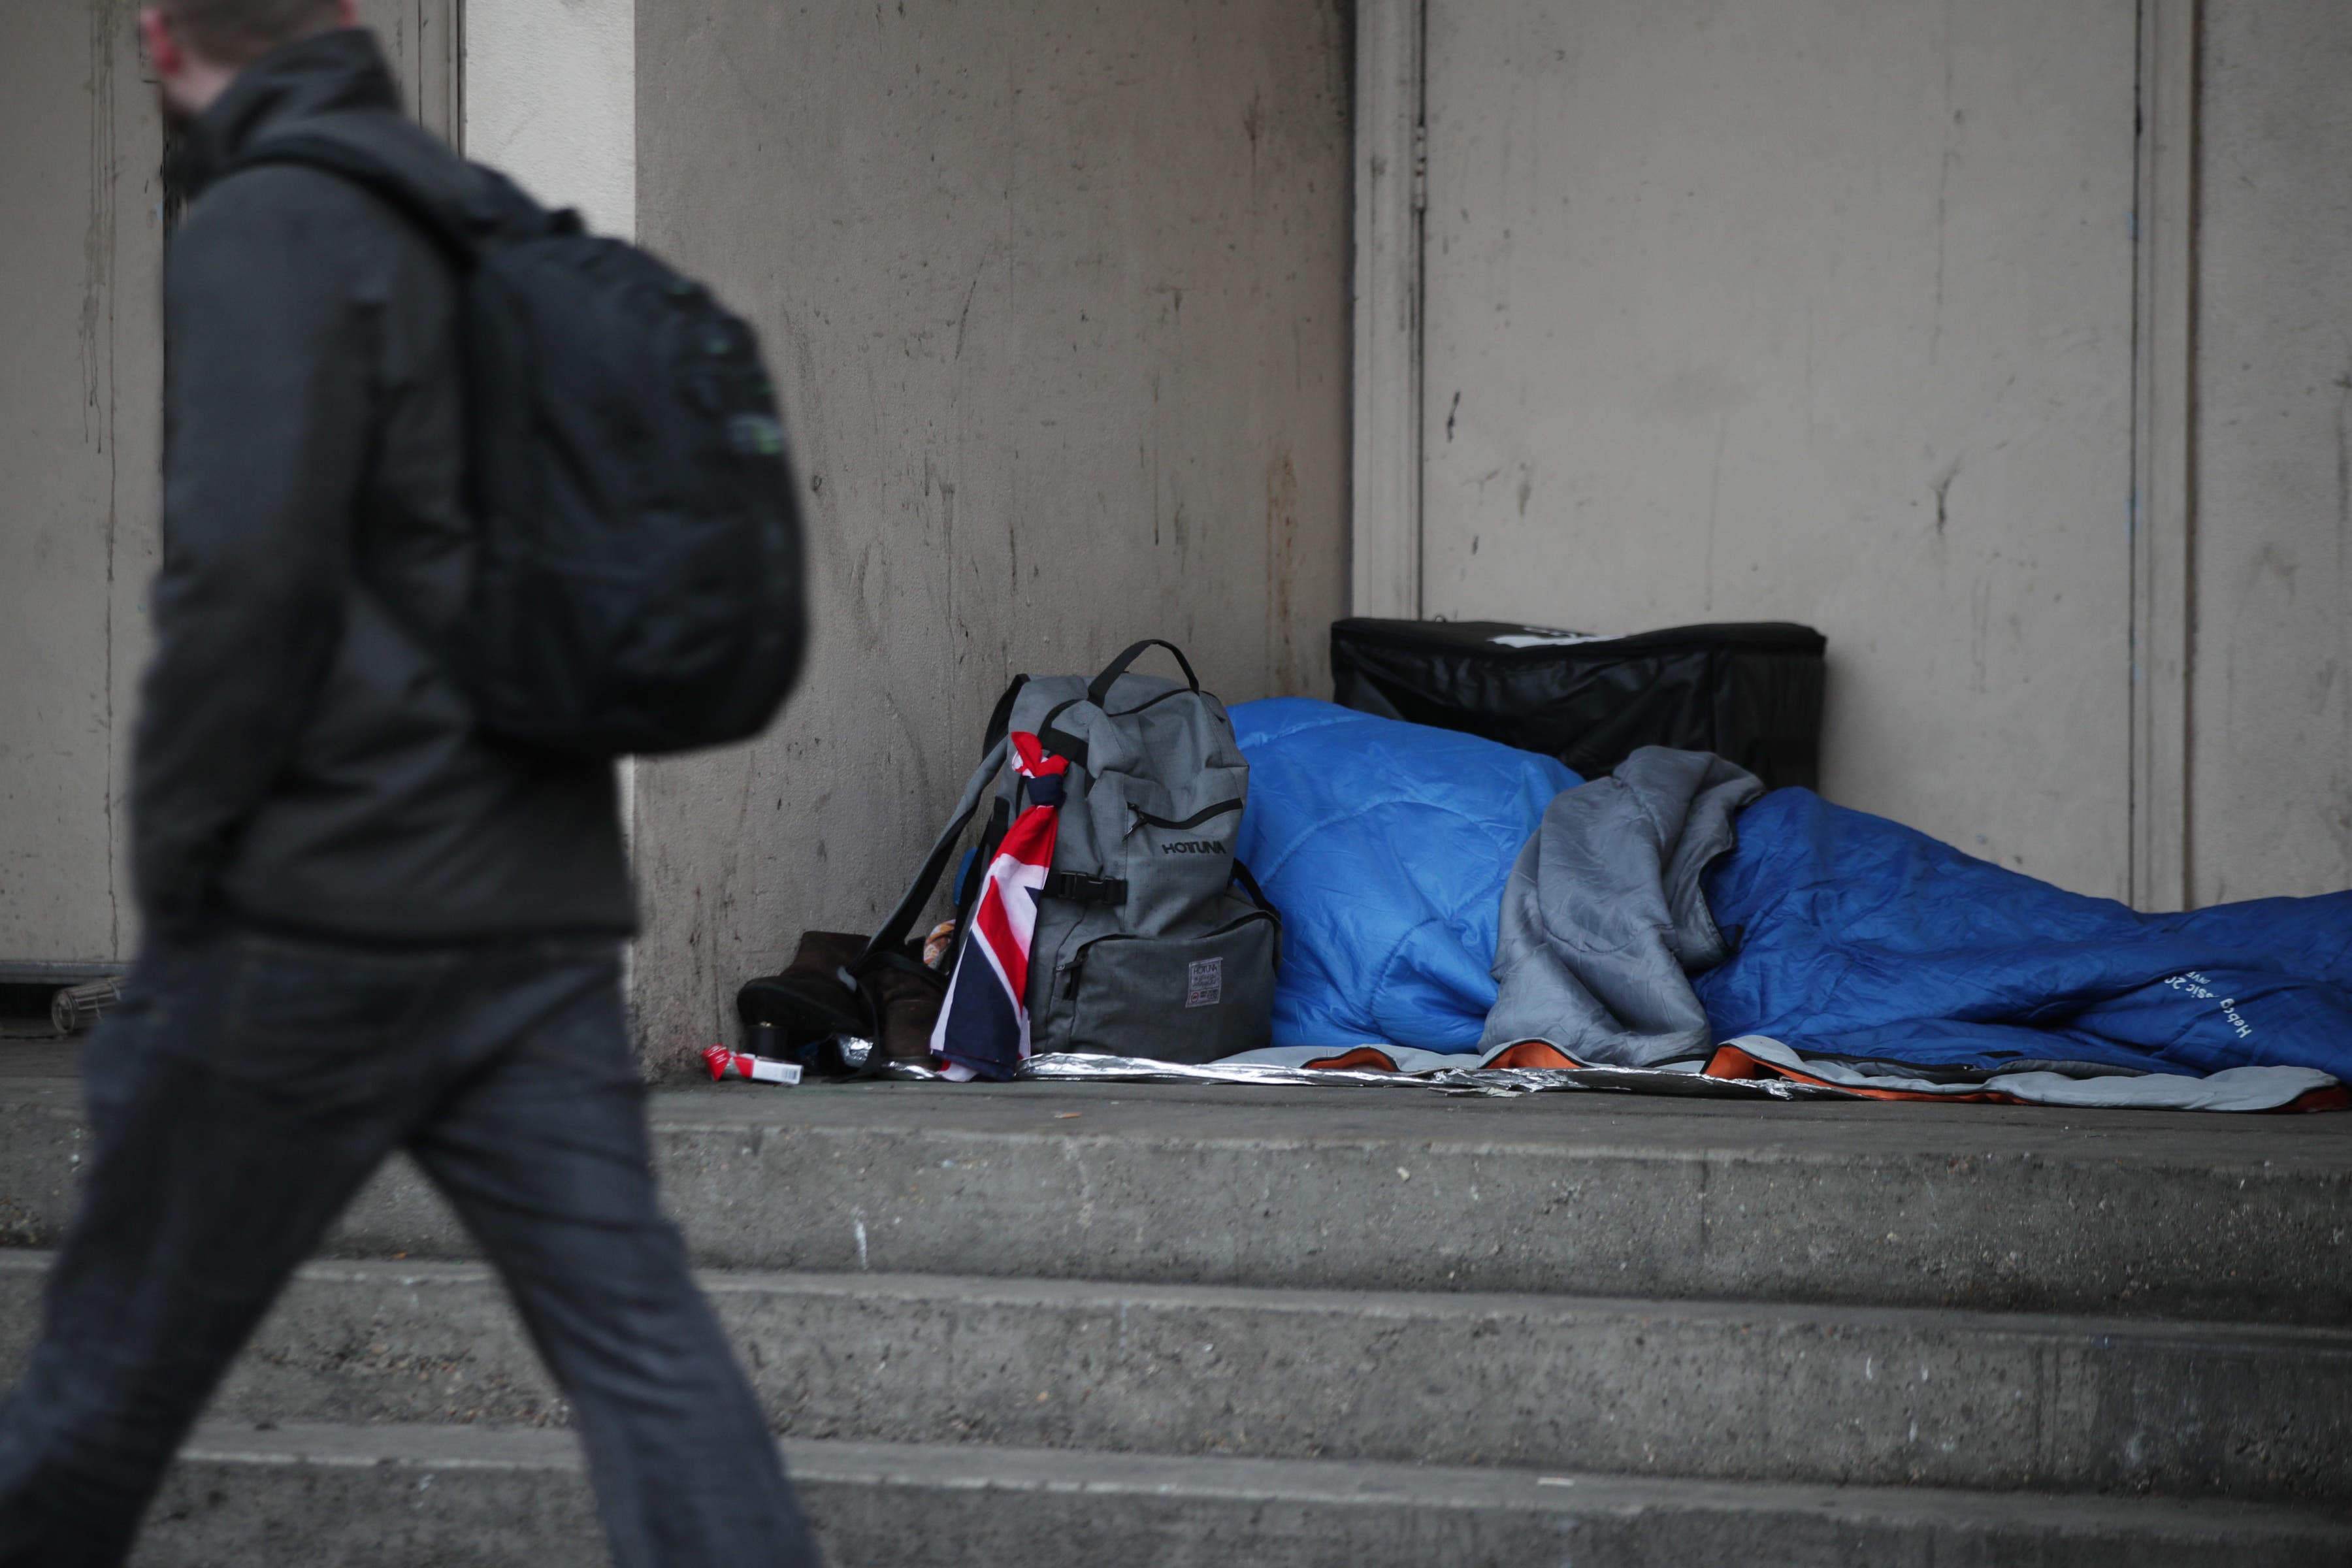 A tent is a lifeline not a lifestyle choice for rough sleepers